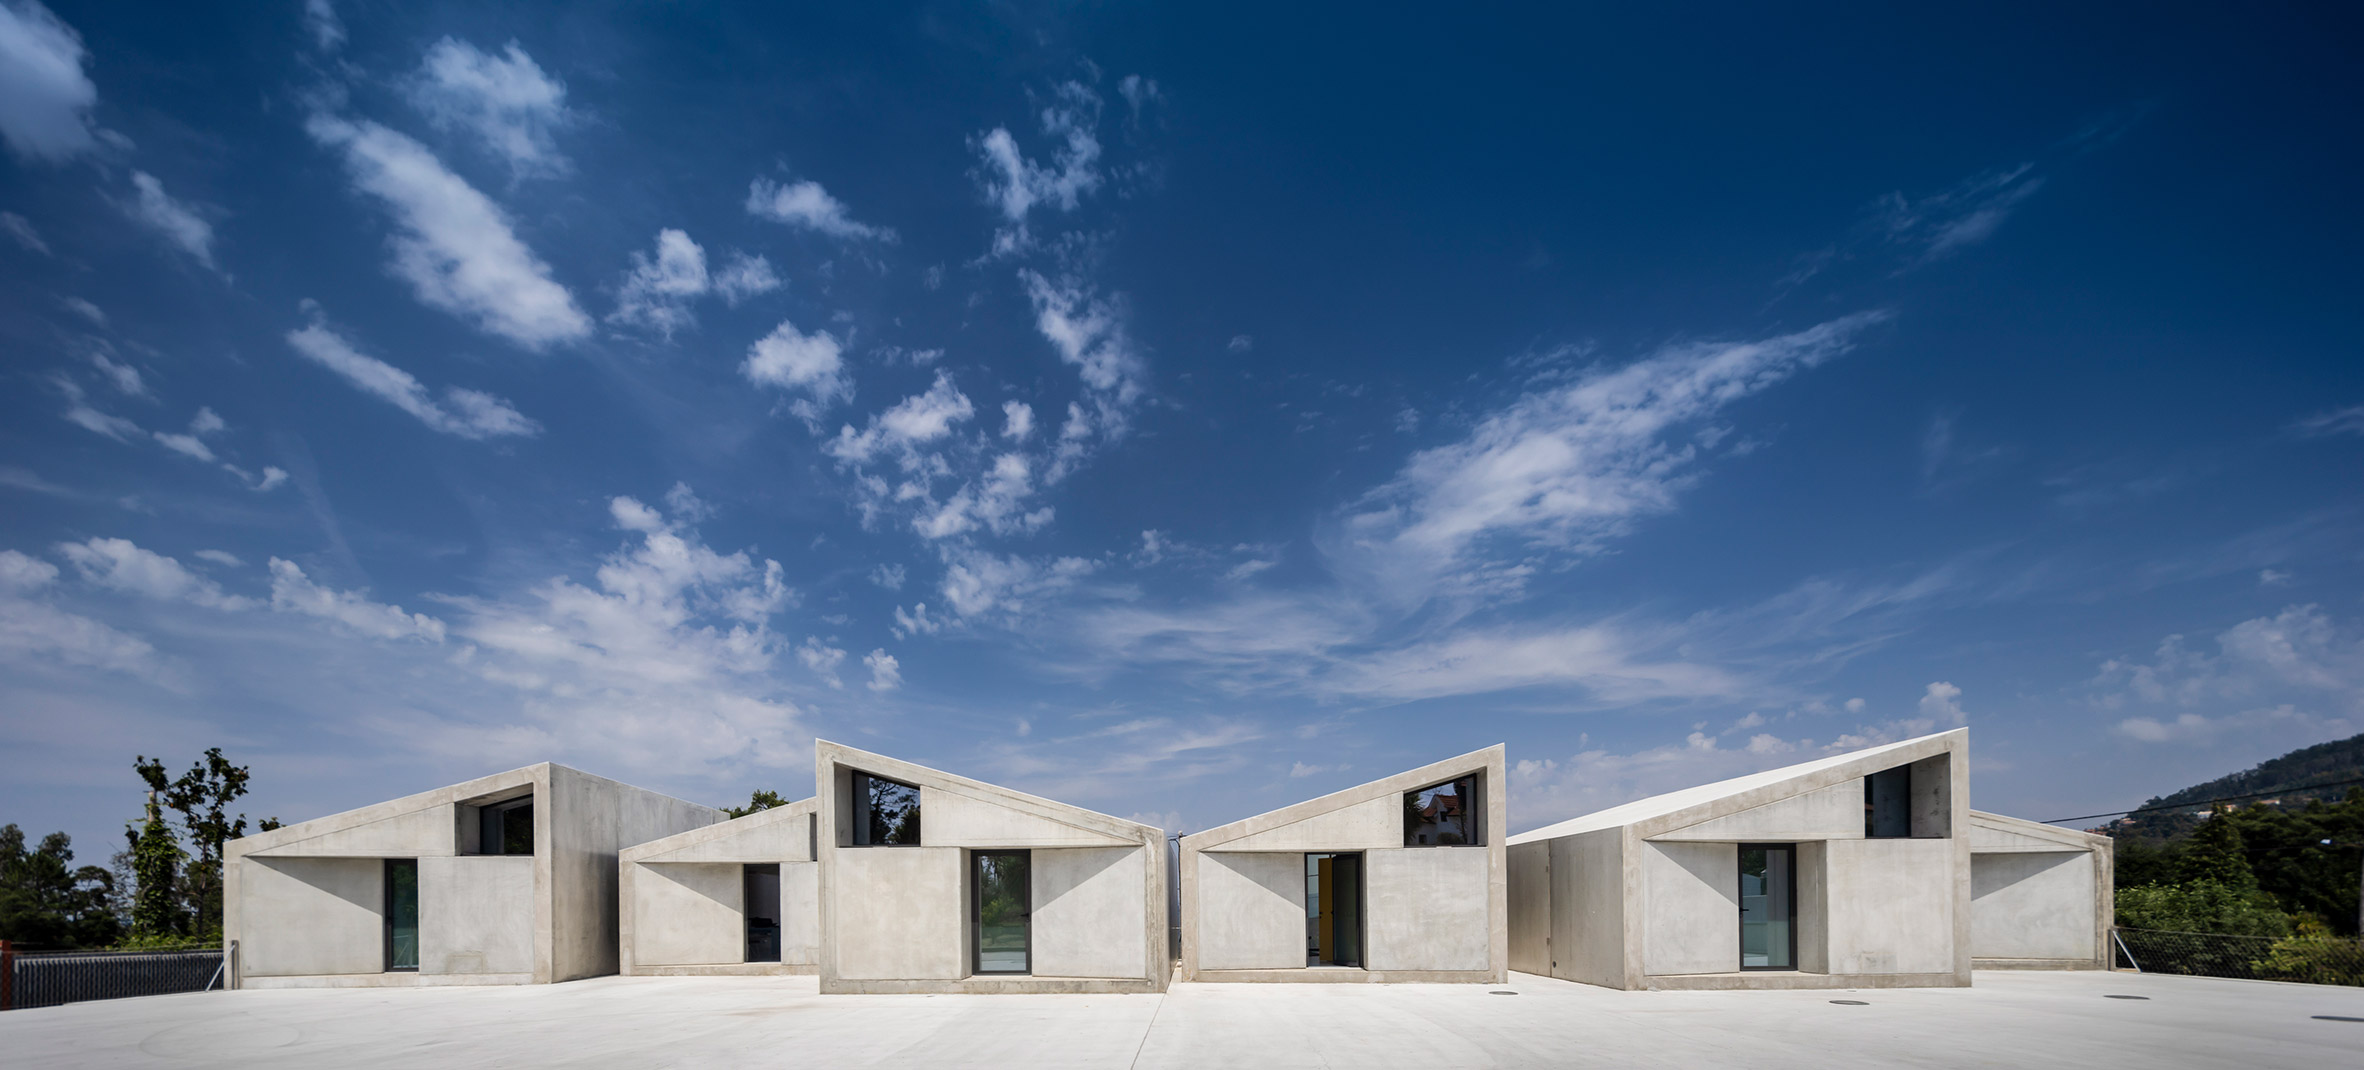 Exterior of VDC modular prefabricated concrete housing by Summary in Portugal